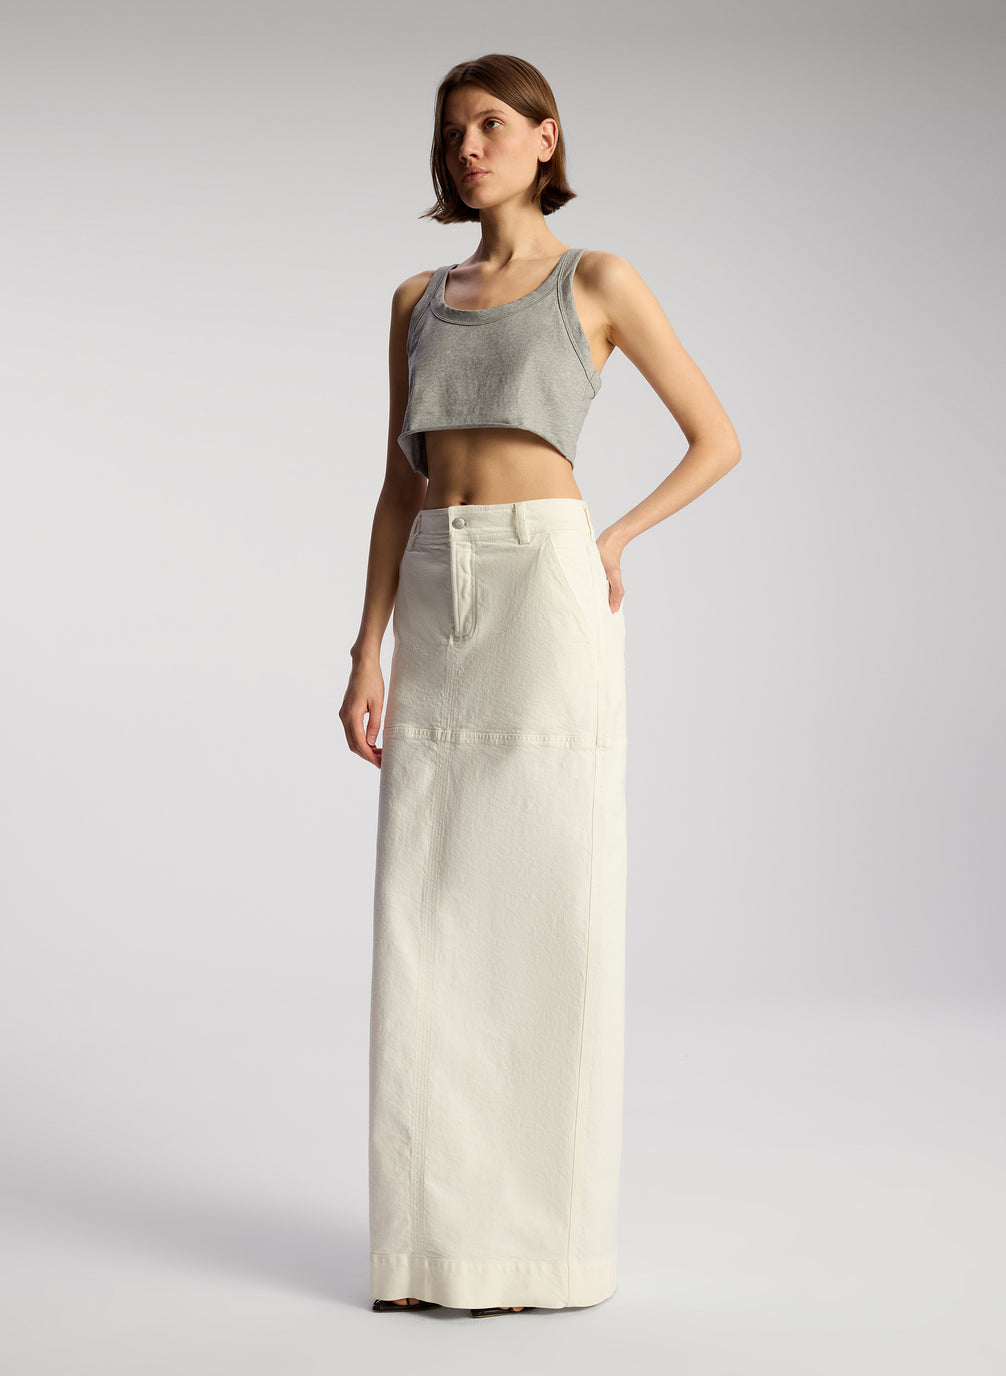 side view of woman wearing grey cropped tank and whit maxi skirt